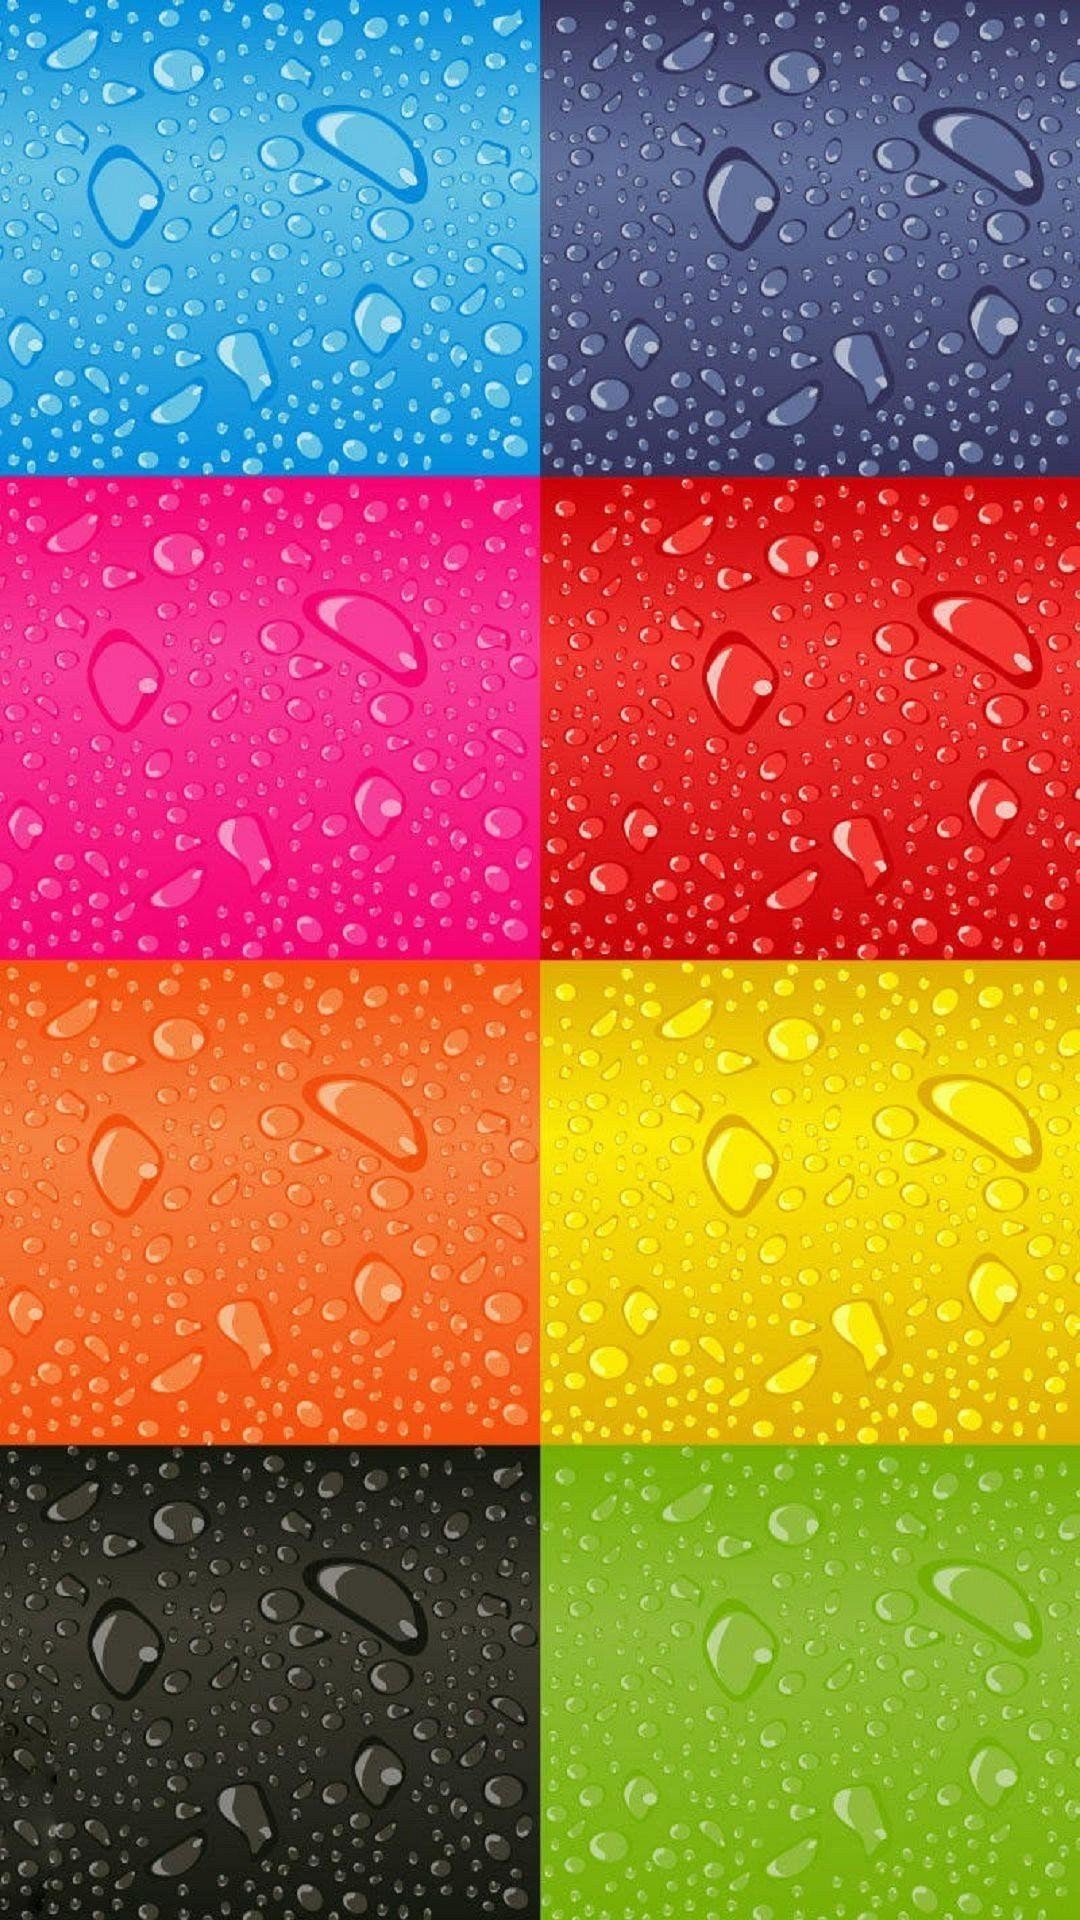 1080x1920 Different Colors on iPhone 6 Home and Lock Screen Display Wallpaper